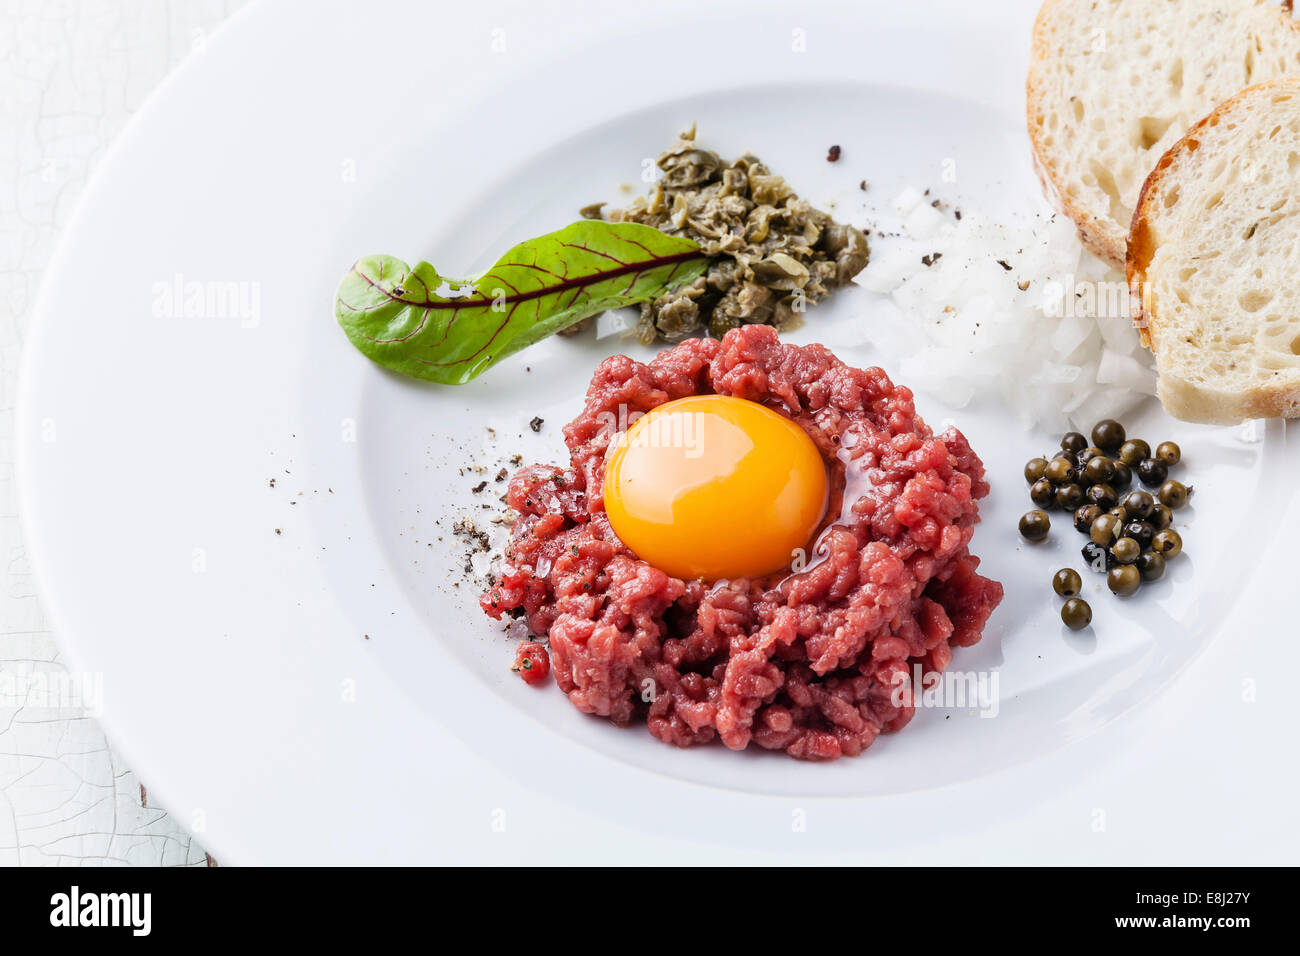 Beef tartare with capers and bread on white plate Stock Photo